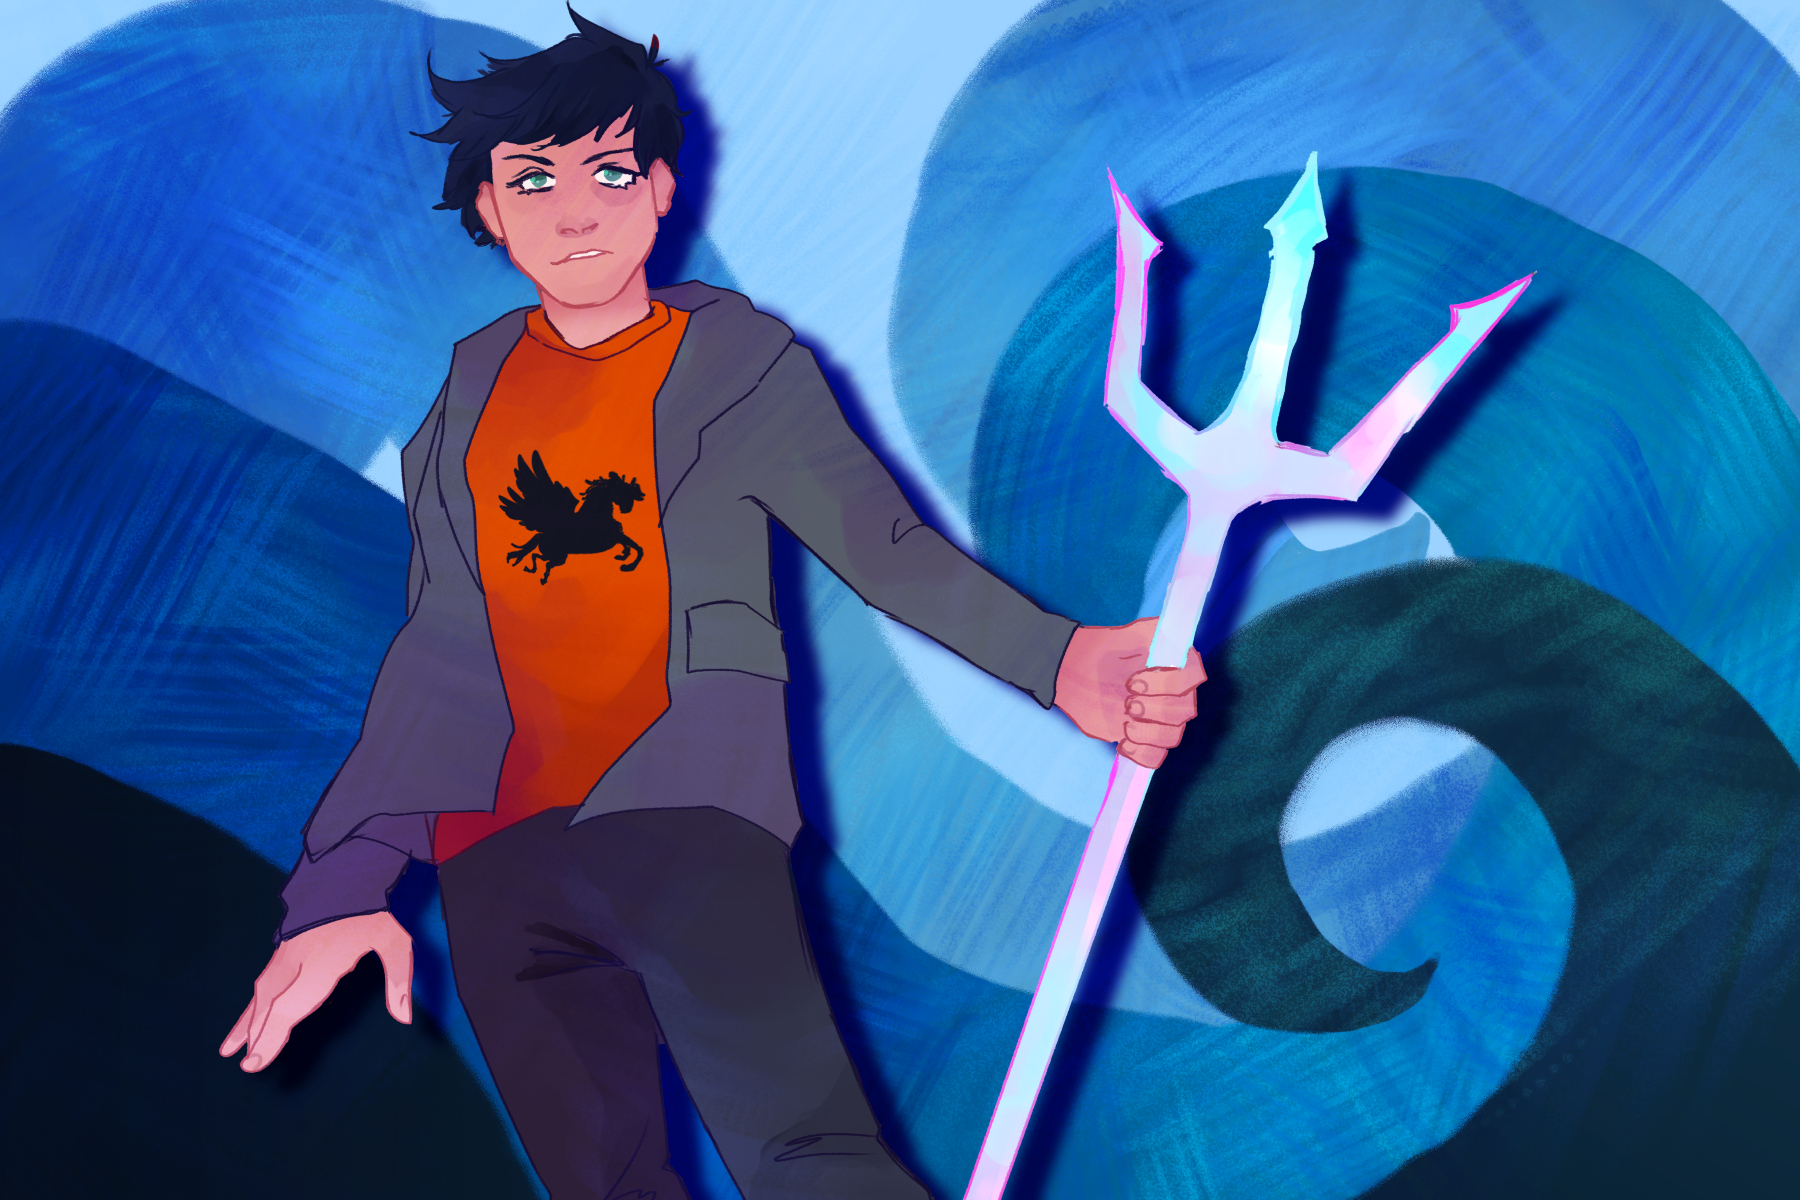 An illustration of Percy Jackson